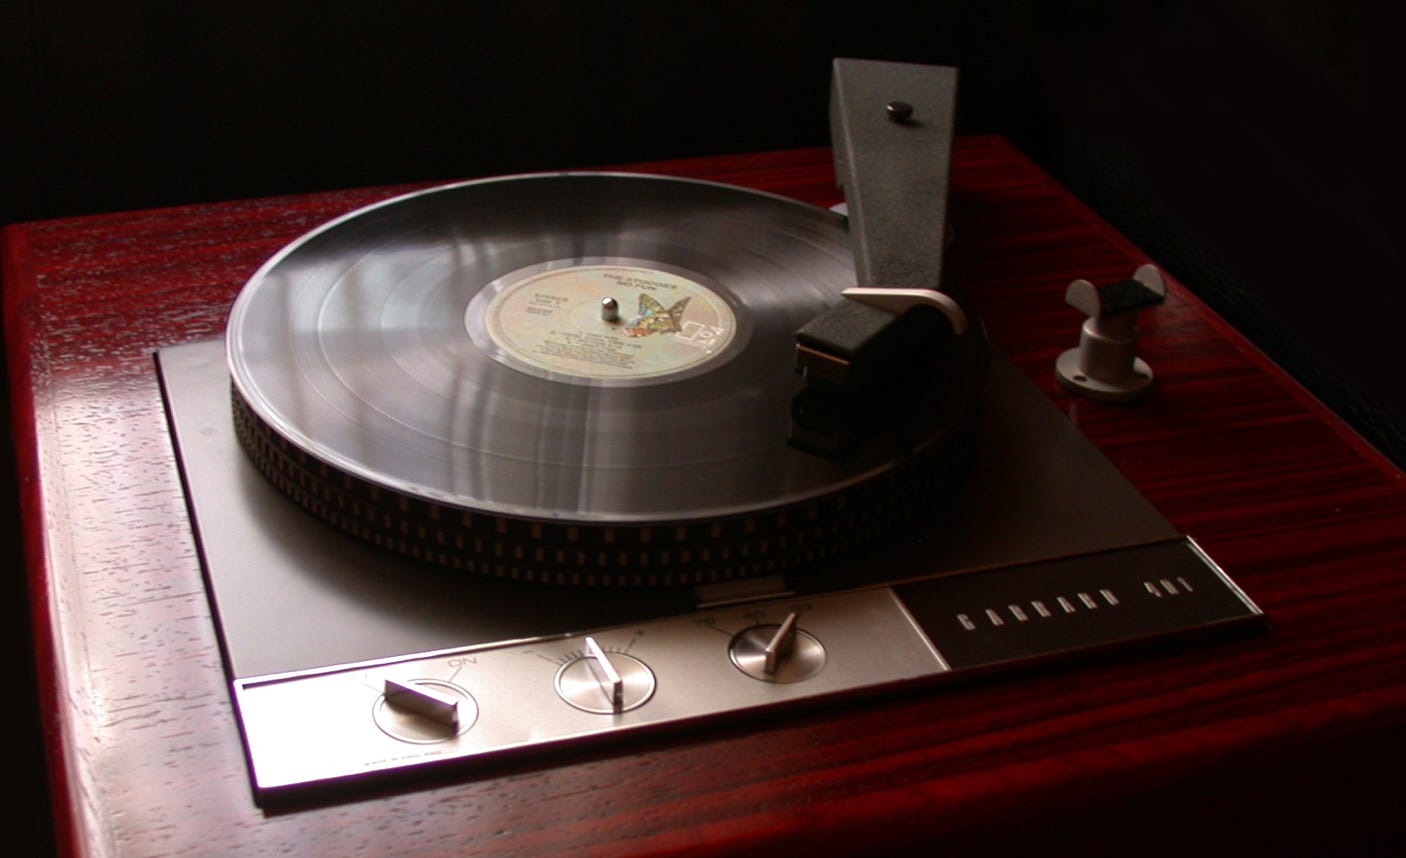 The turntable was matched with a Karmadon remake of the Gray 206 tonearm and a  DENON DL-102 cartridge.